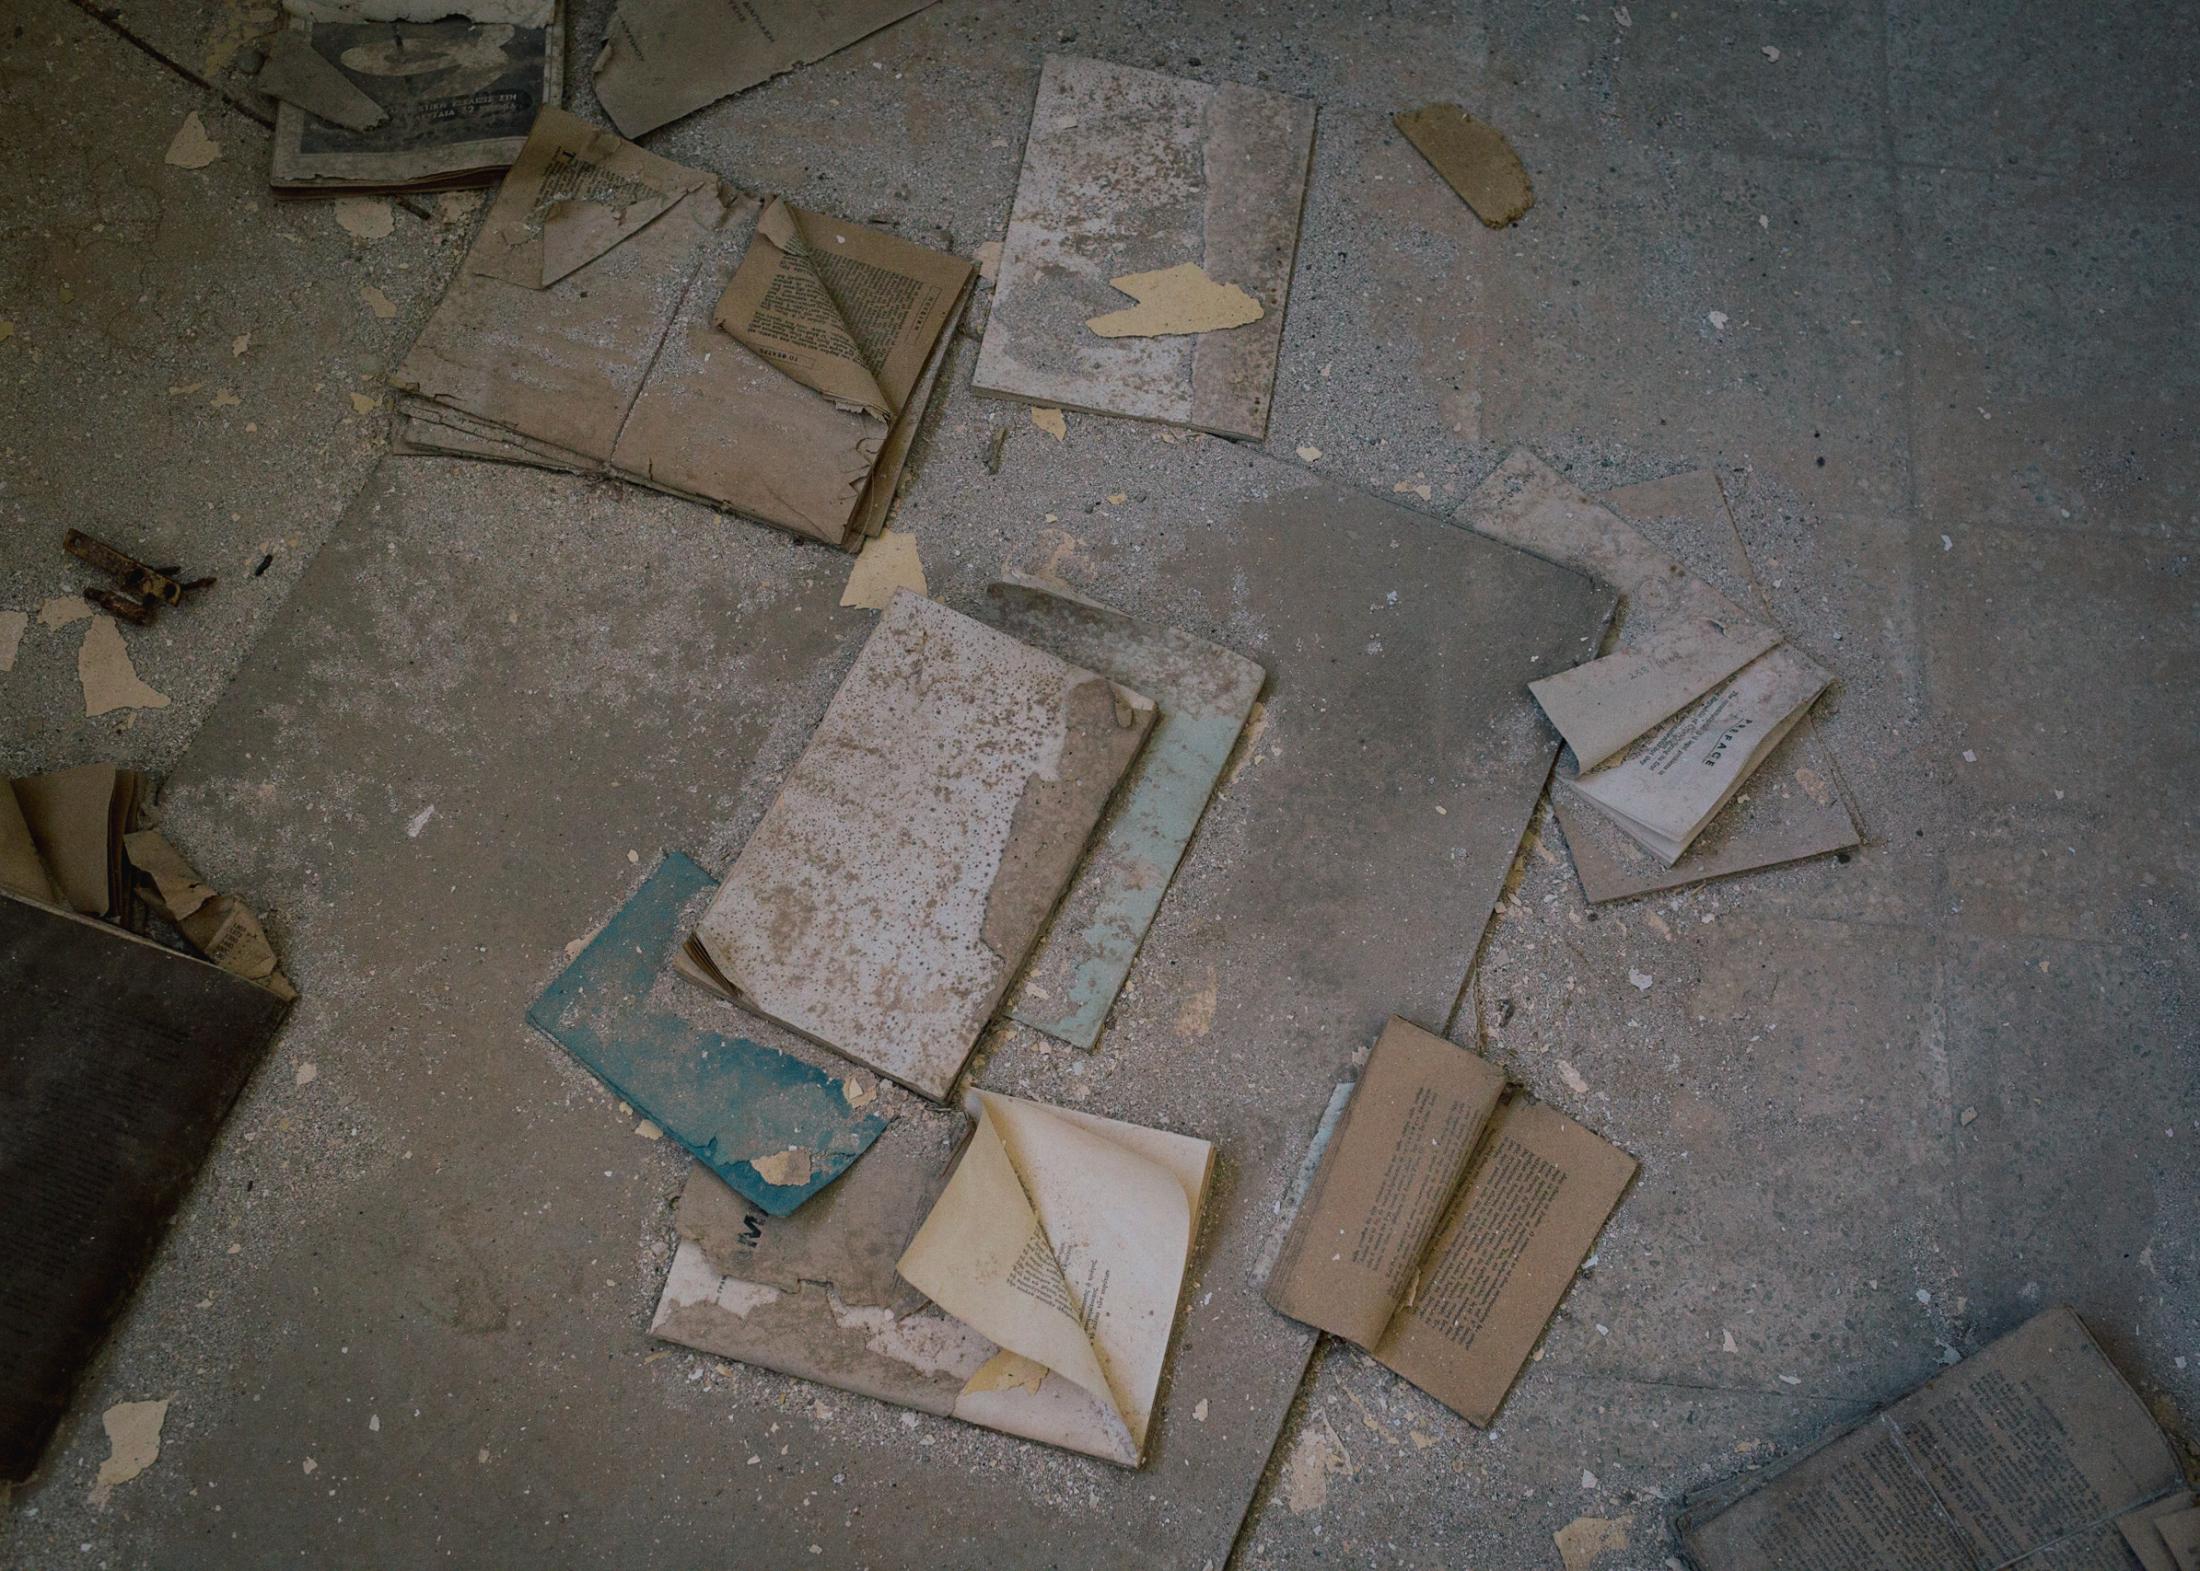 Books lie scattered on the floor in the former library in the ghost town.